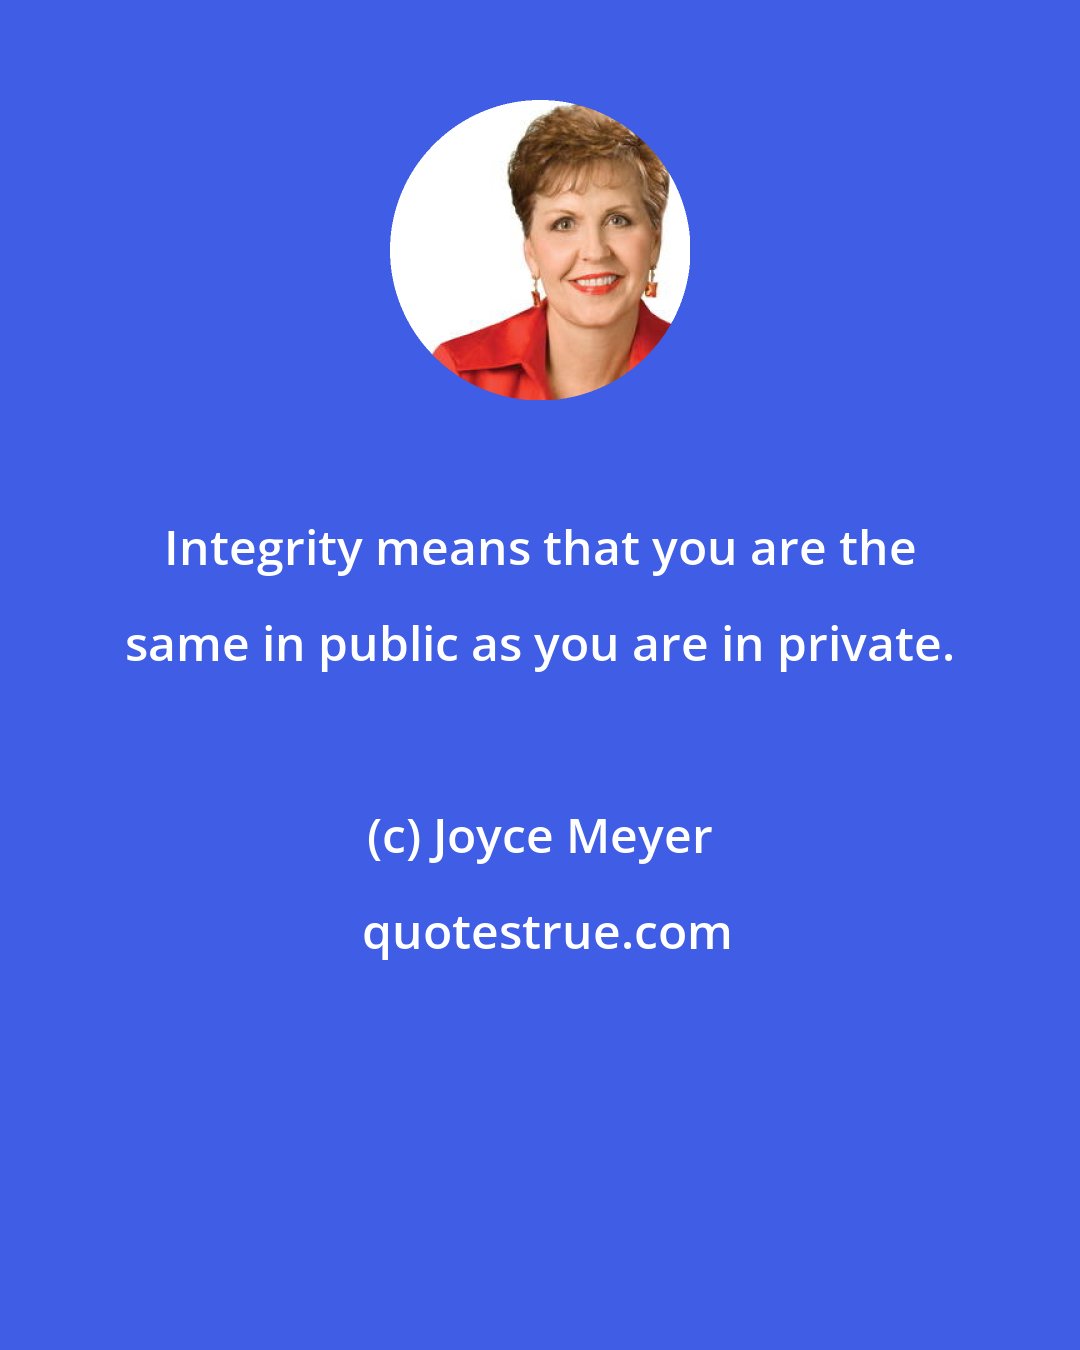 Joyce Meyer: Integrity means that you are the same in public as you are in private.